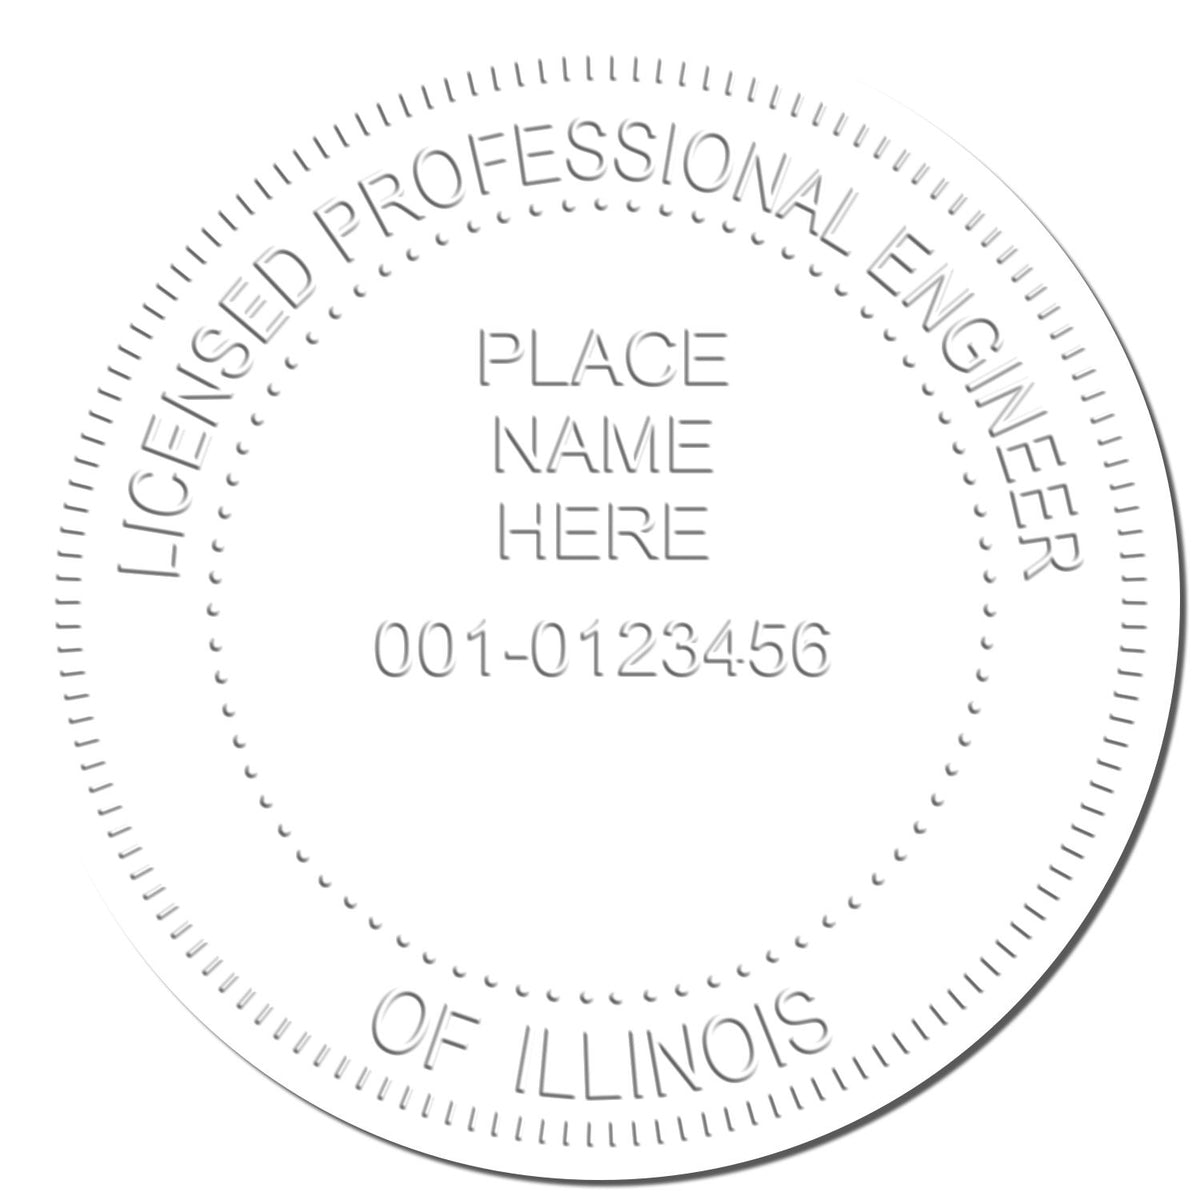 This paper is stamped with a sample imprint of the Hybrid Illinois Engineer Seal, signifying its quality and reliability.